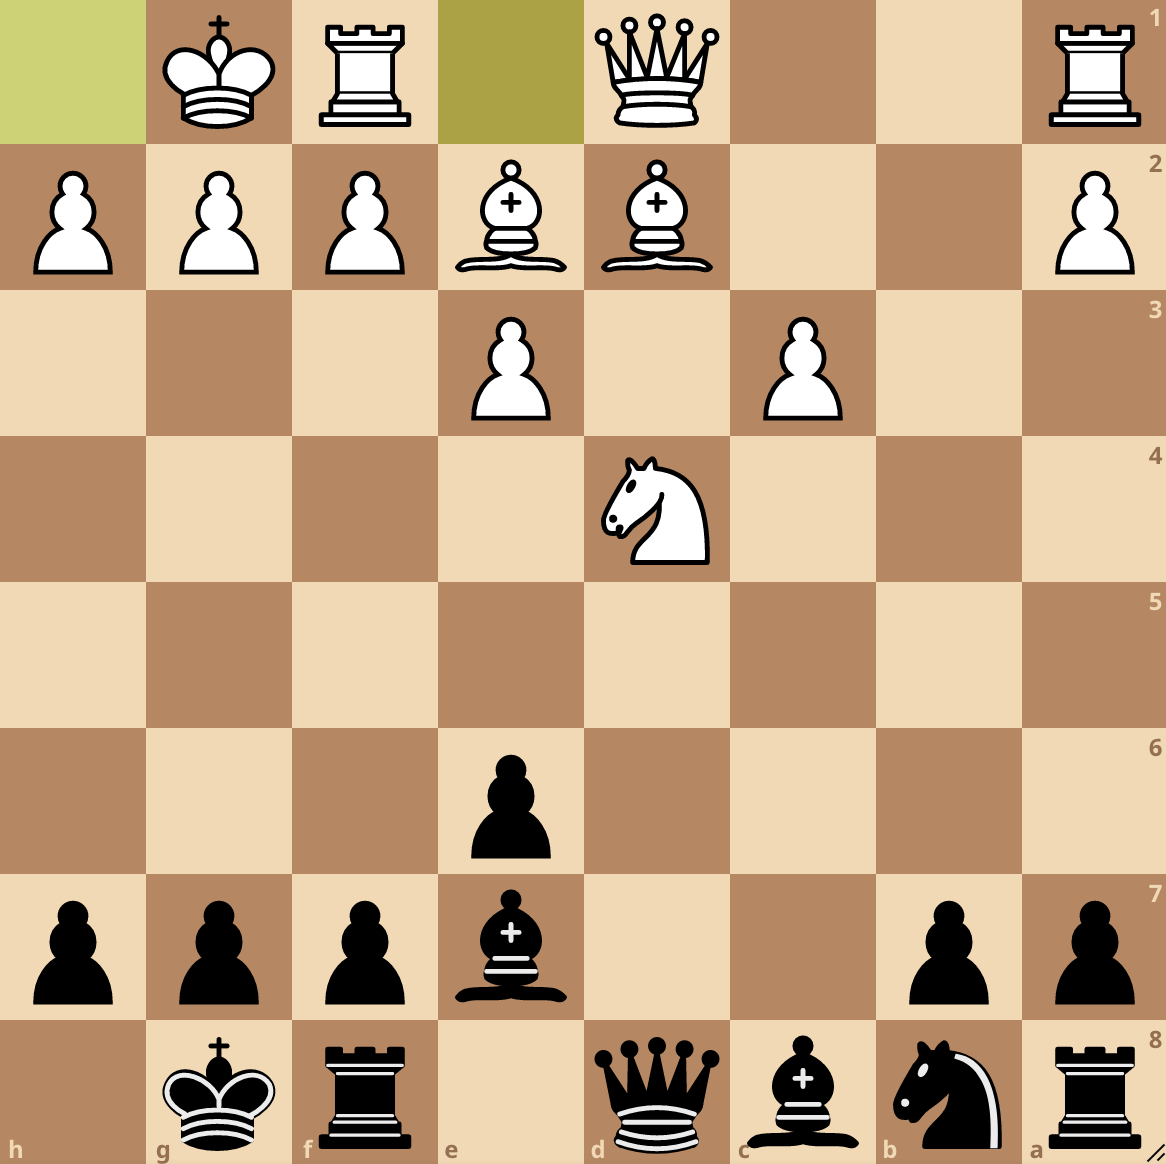 Make sense of chess engine output with Move Highlighter